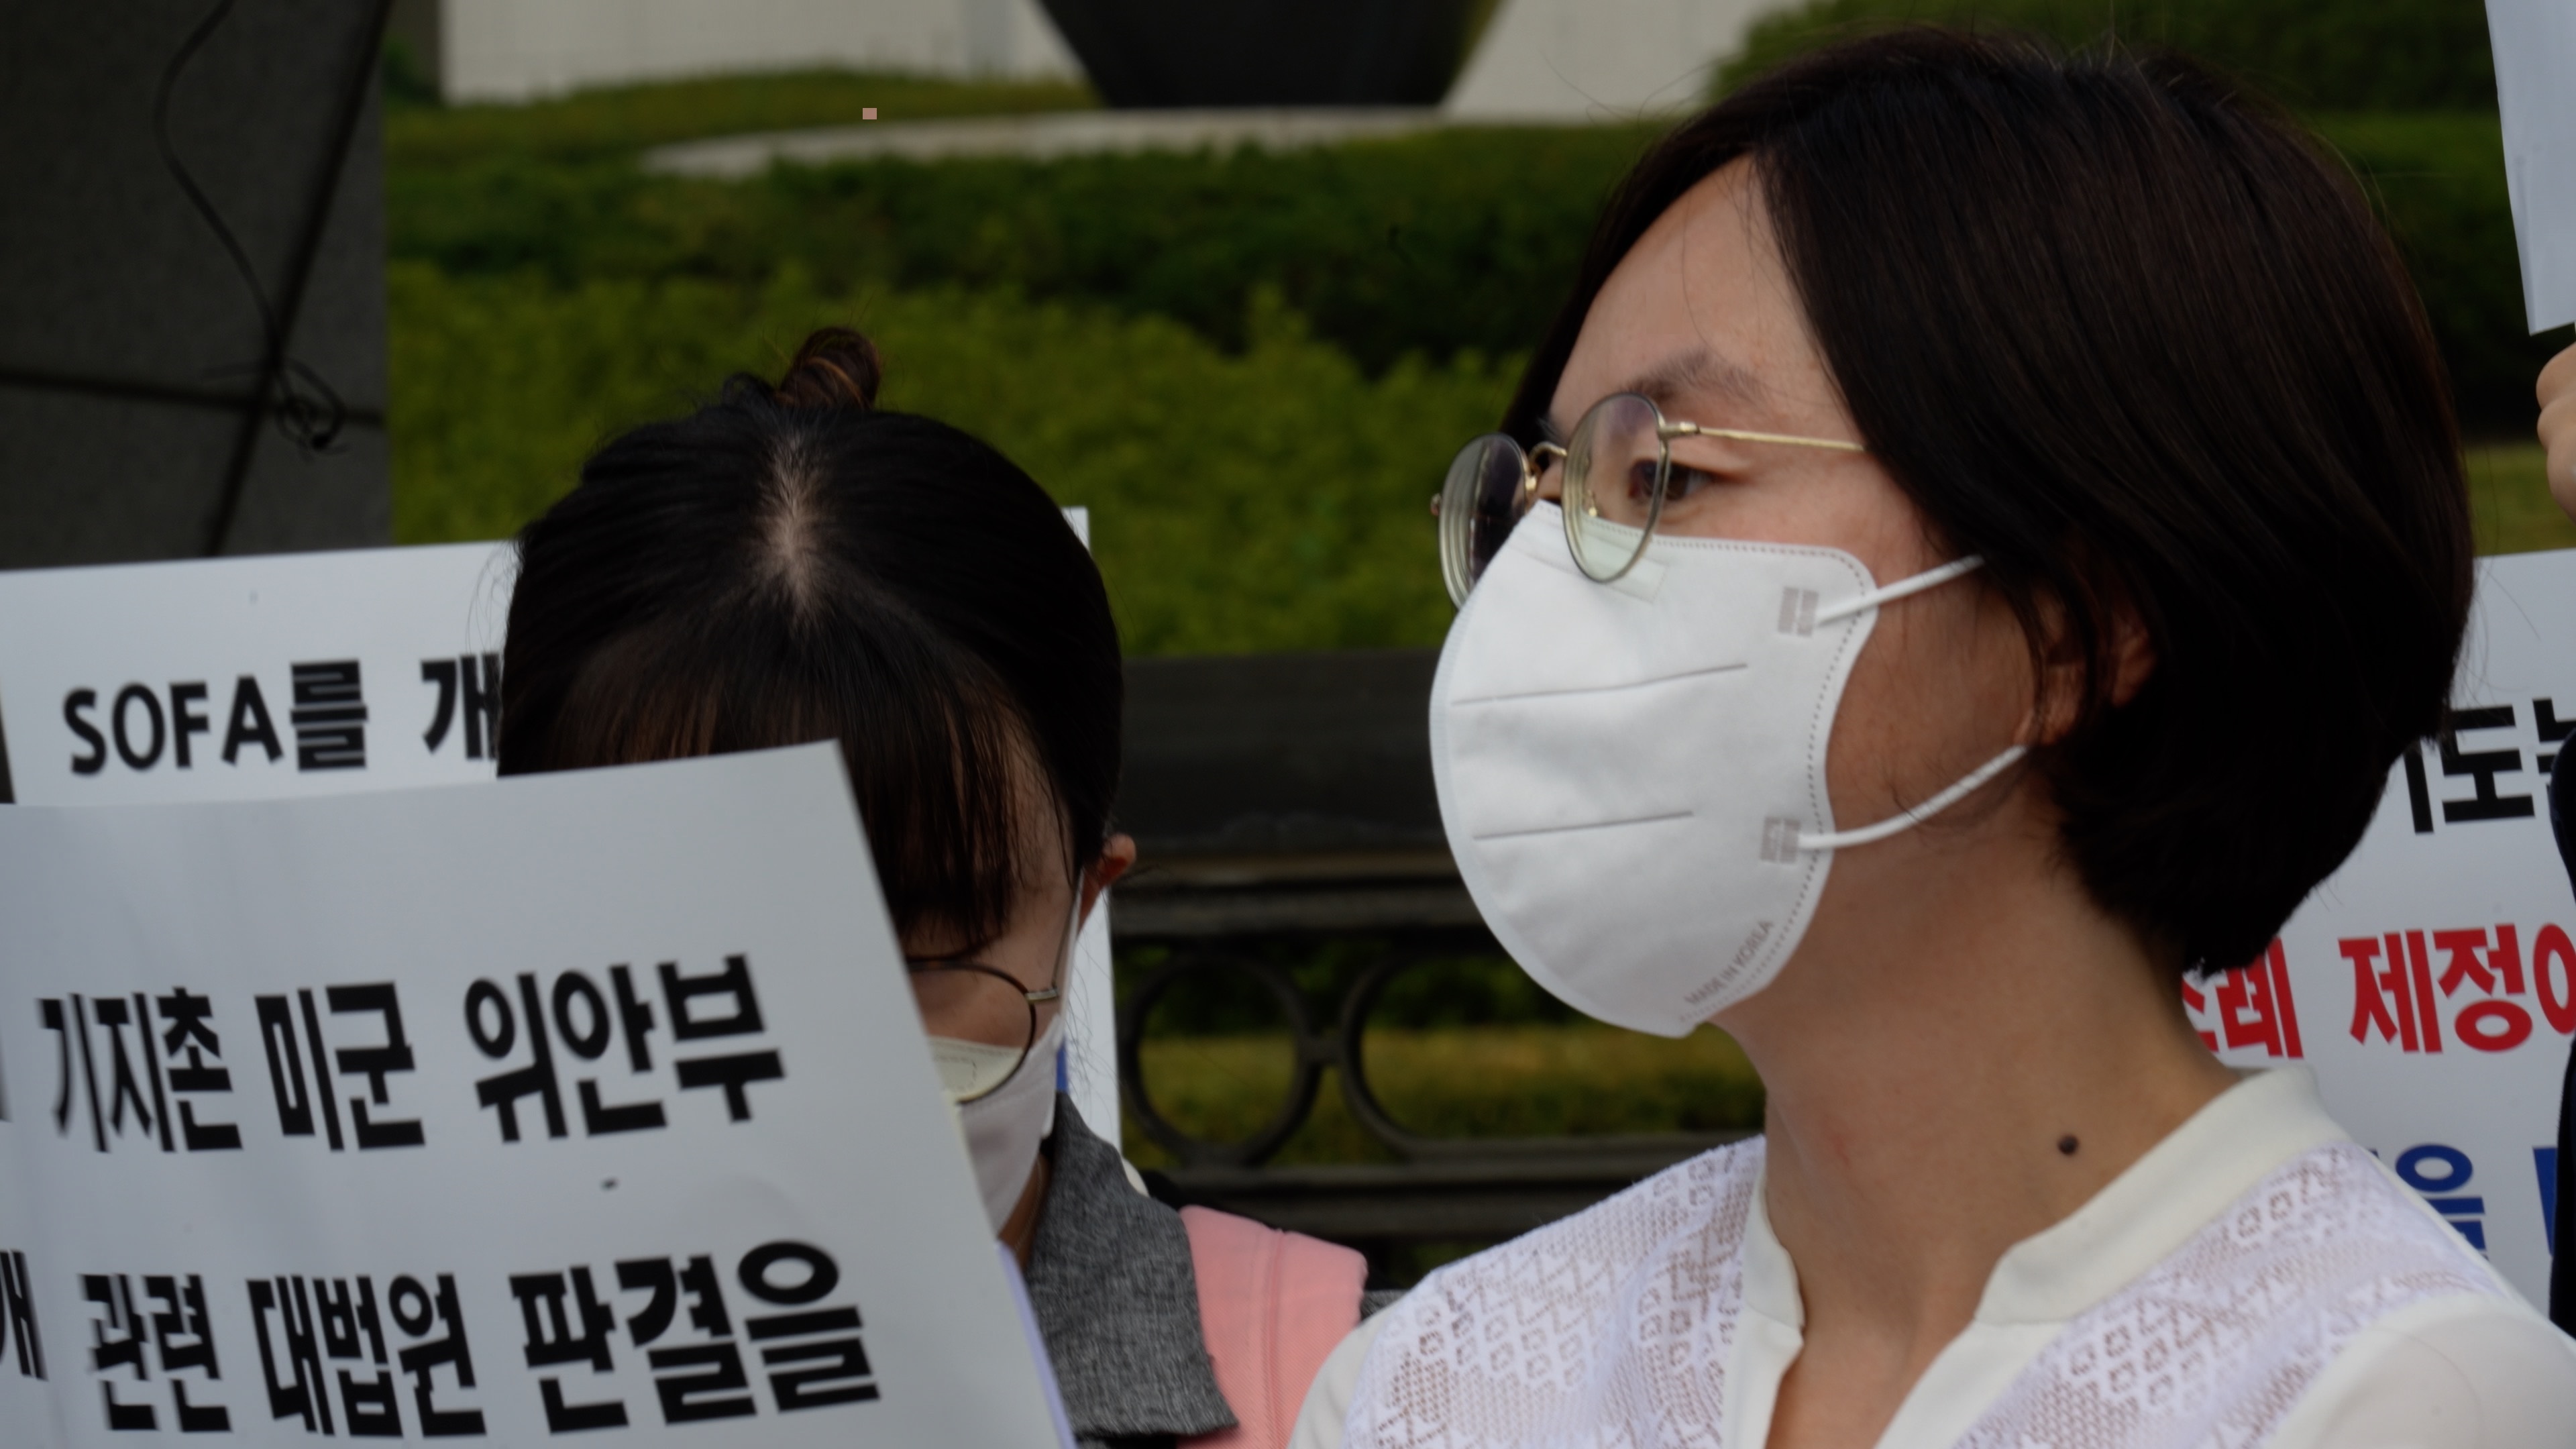 Professor Jeong Mi Park at the press conference held on September 29 in front of the Supreme Court’s main gate. ⓒ Gowoon Lee